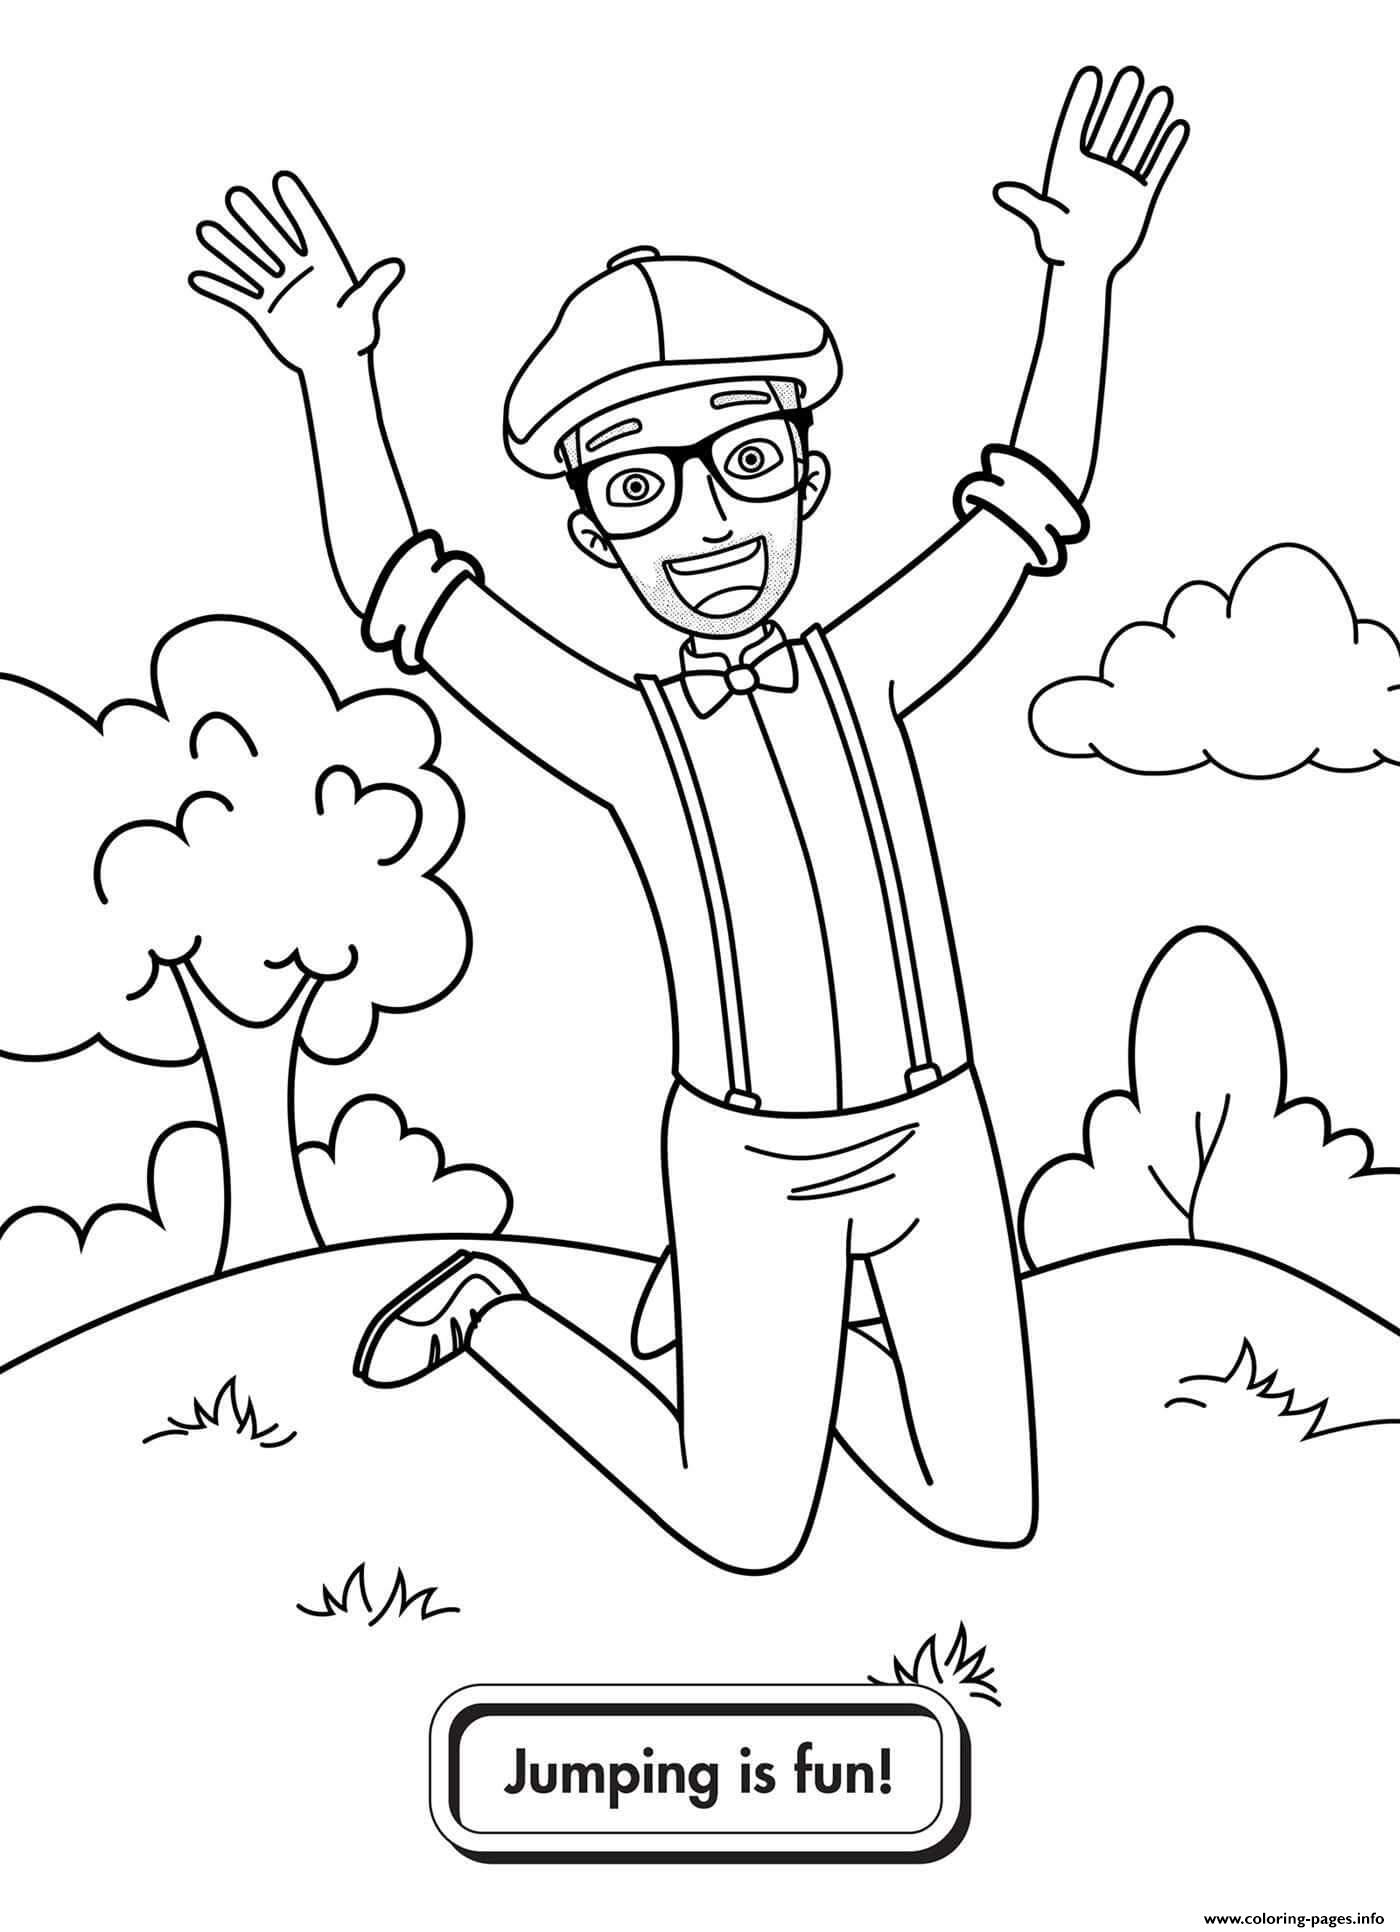 blippi-jumping-is-fun-coloring-page-printable